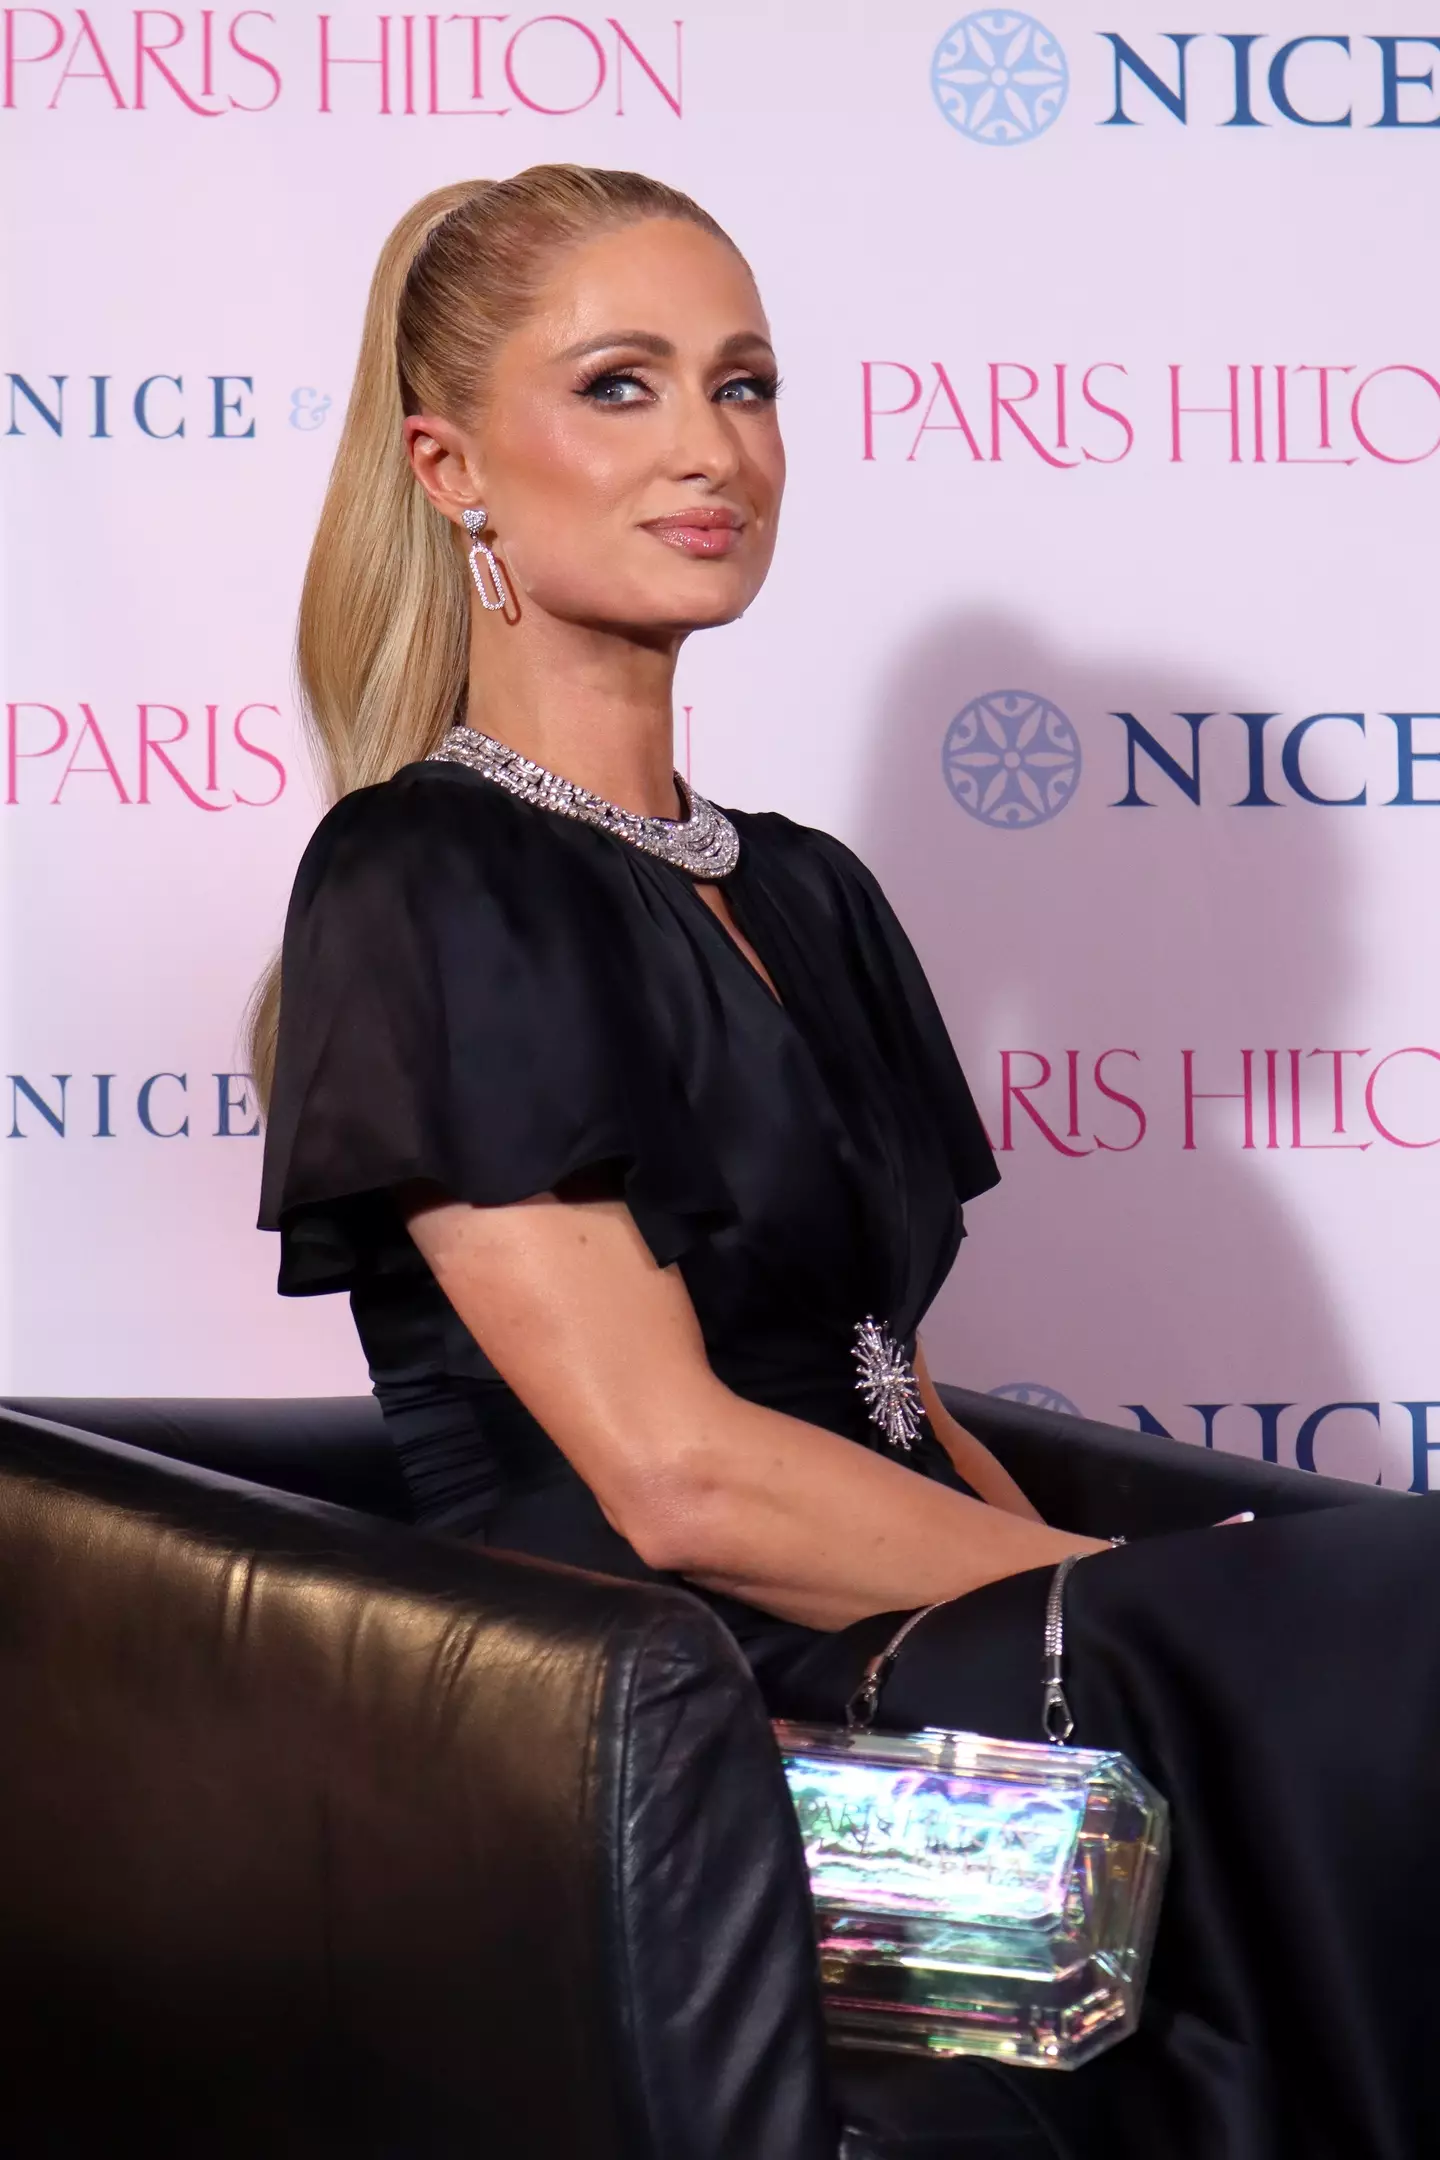 Paris Hilton wasn't happy when trolls came after her son's appearance.